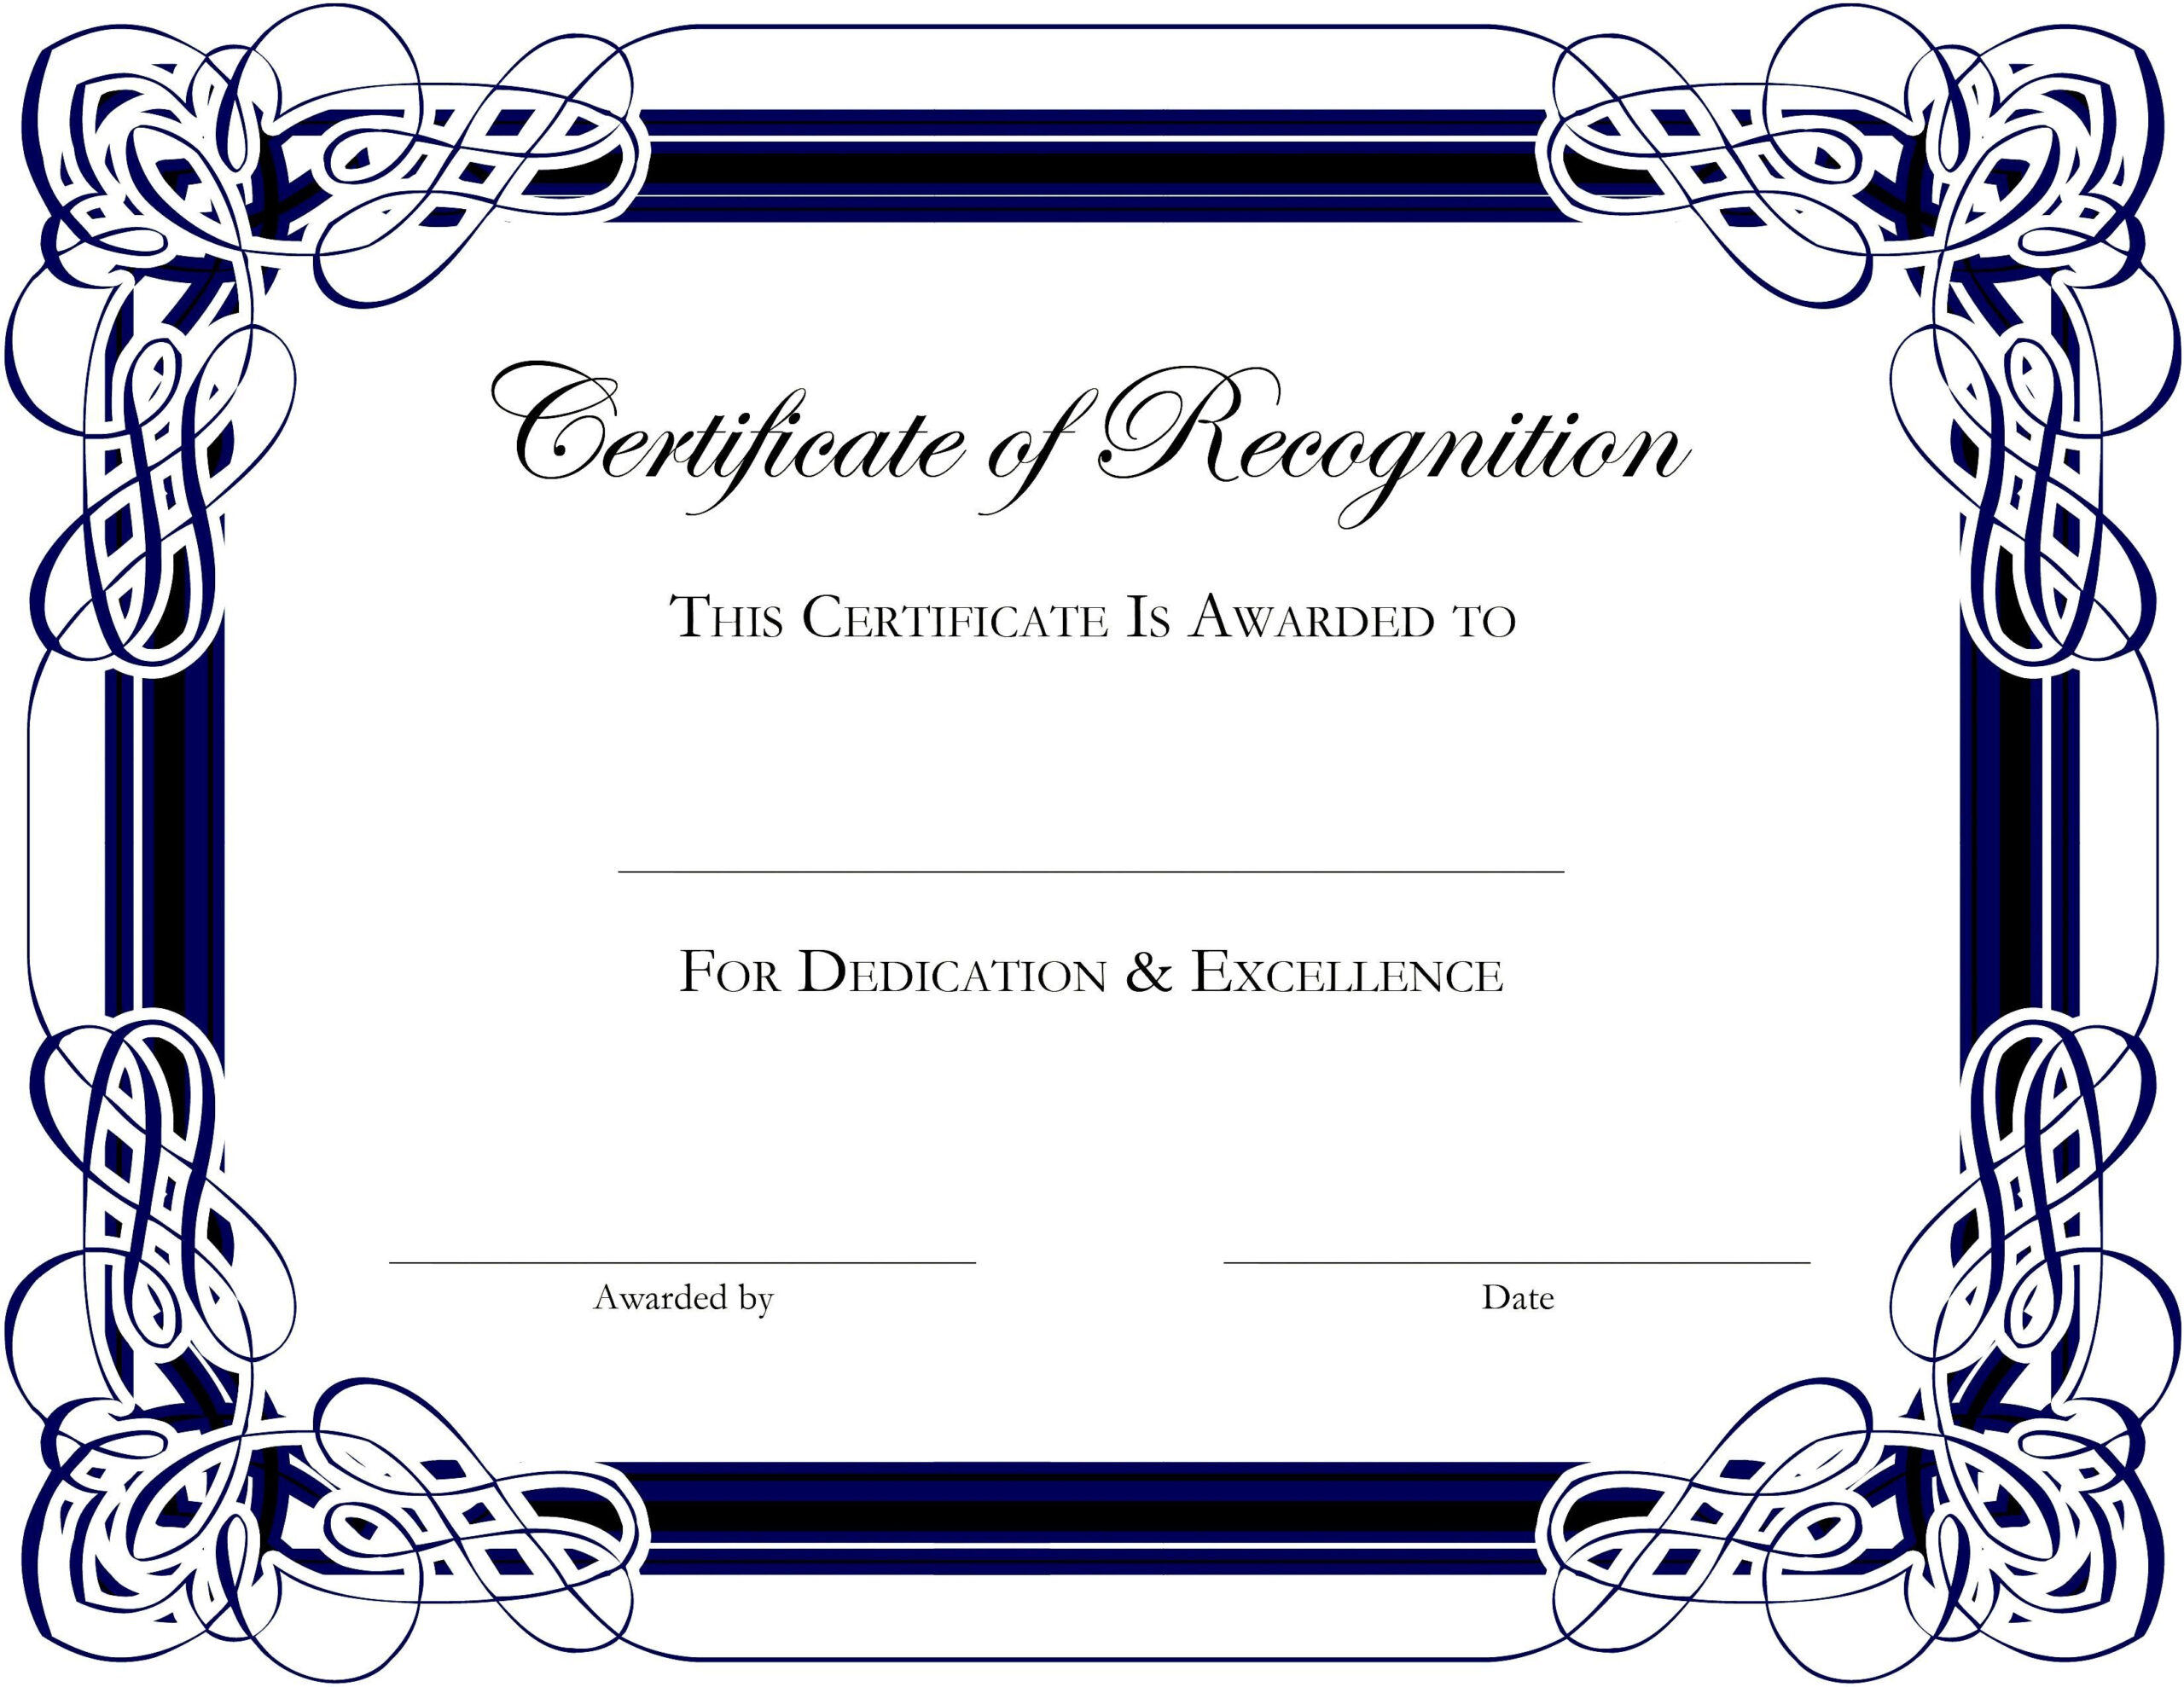 Award Templates For Microsoft Publisher | Besttemplate123 With Regard To Free Template For Certificate Of Recognition